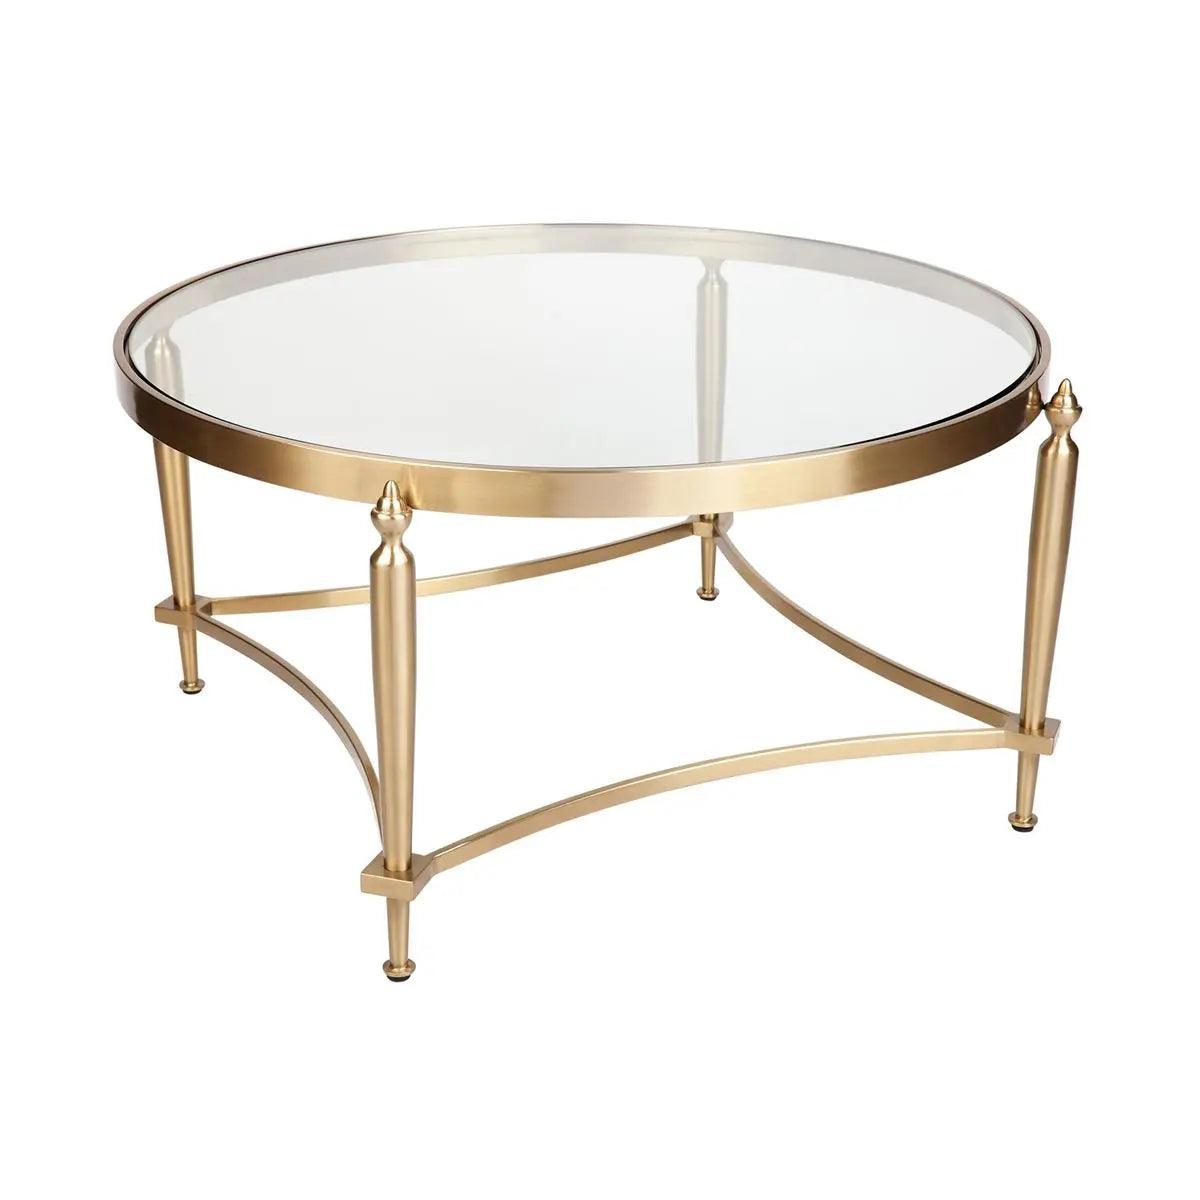 Jak Glass Coffee Table - Gold - Coffee Table322549320294115510 3